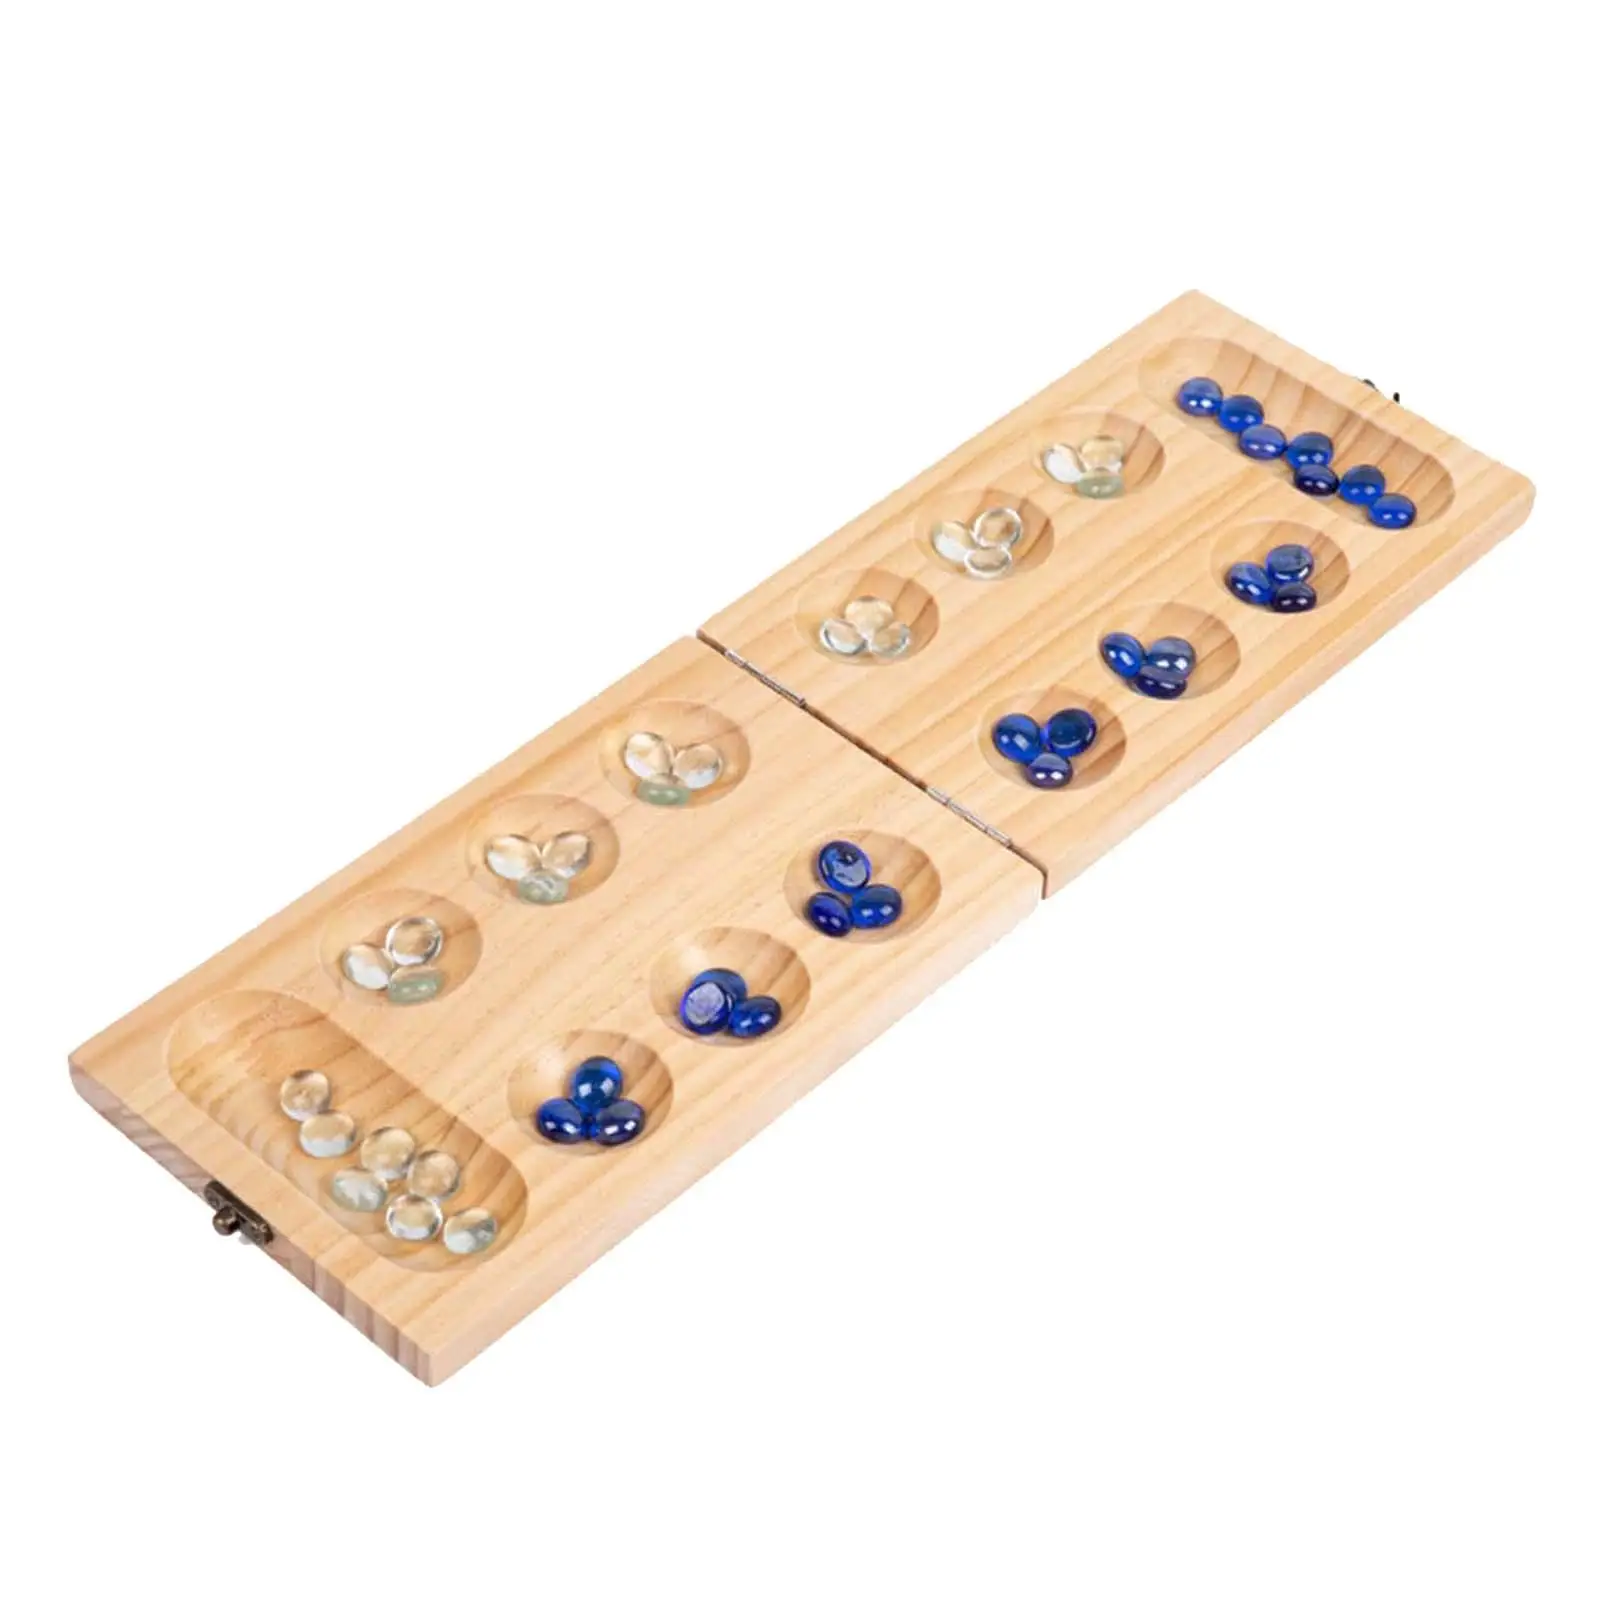 Wood Mancala Board Game Portable Classic Strategy Game Multi Color Beads Family Games for Party Entertainment Adult Ages 7+ Kids